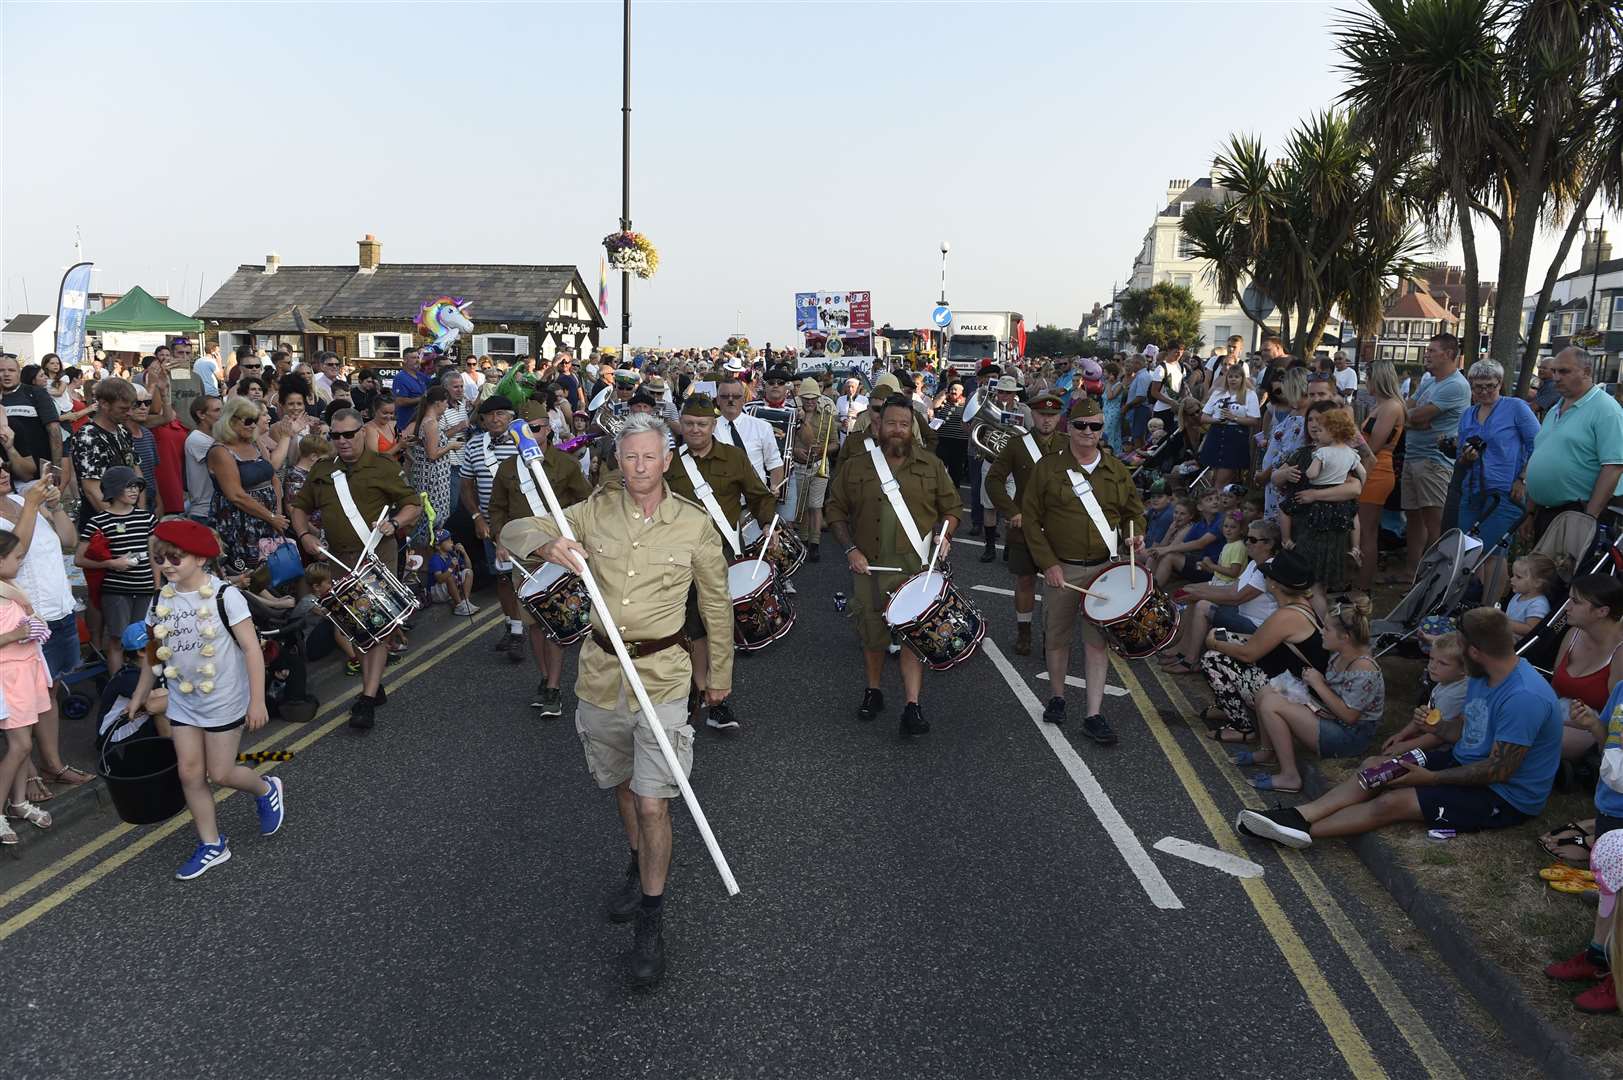 Deal carnival attracts thousands to the seafront each year